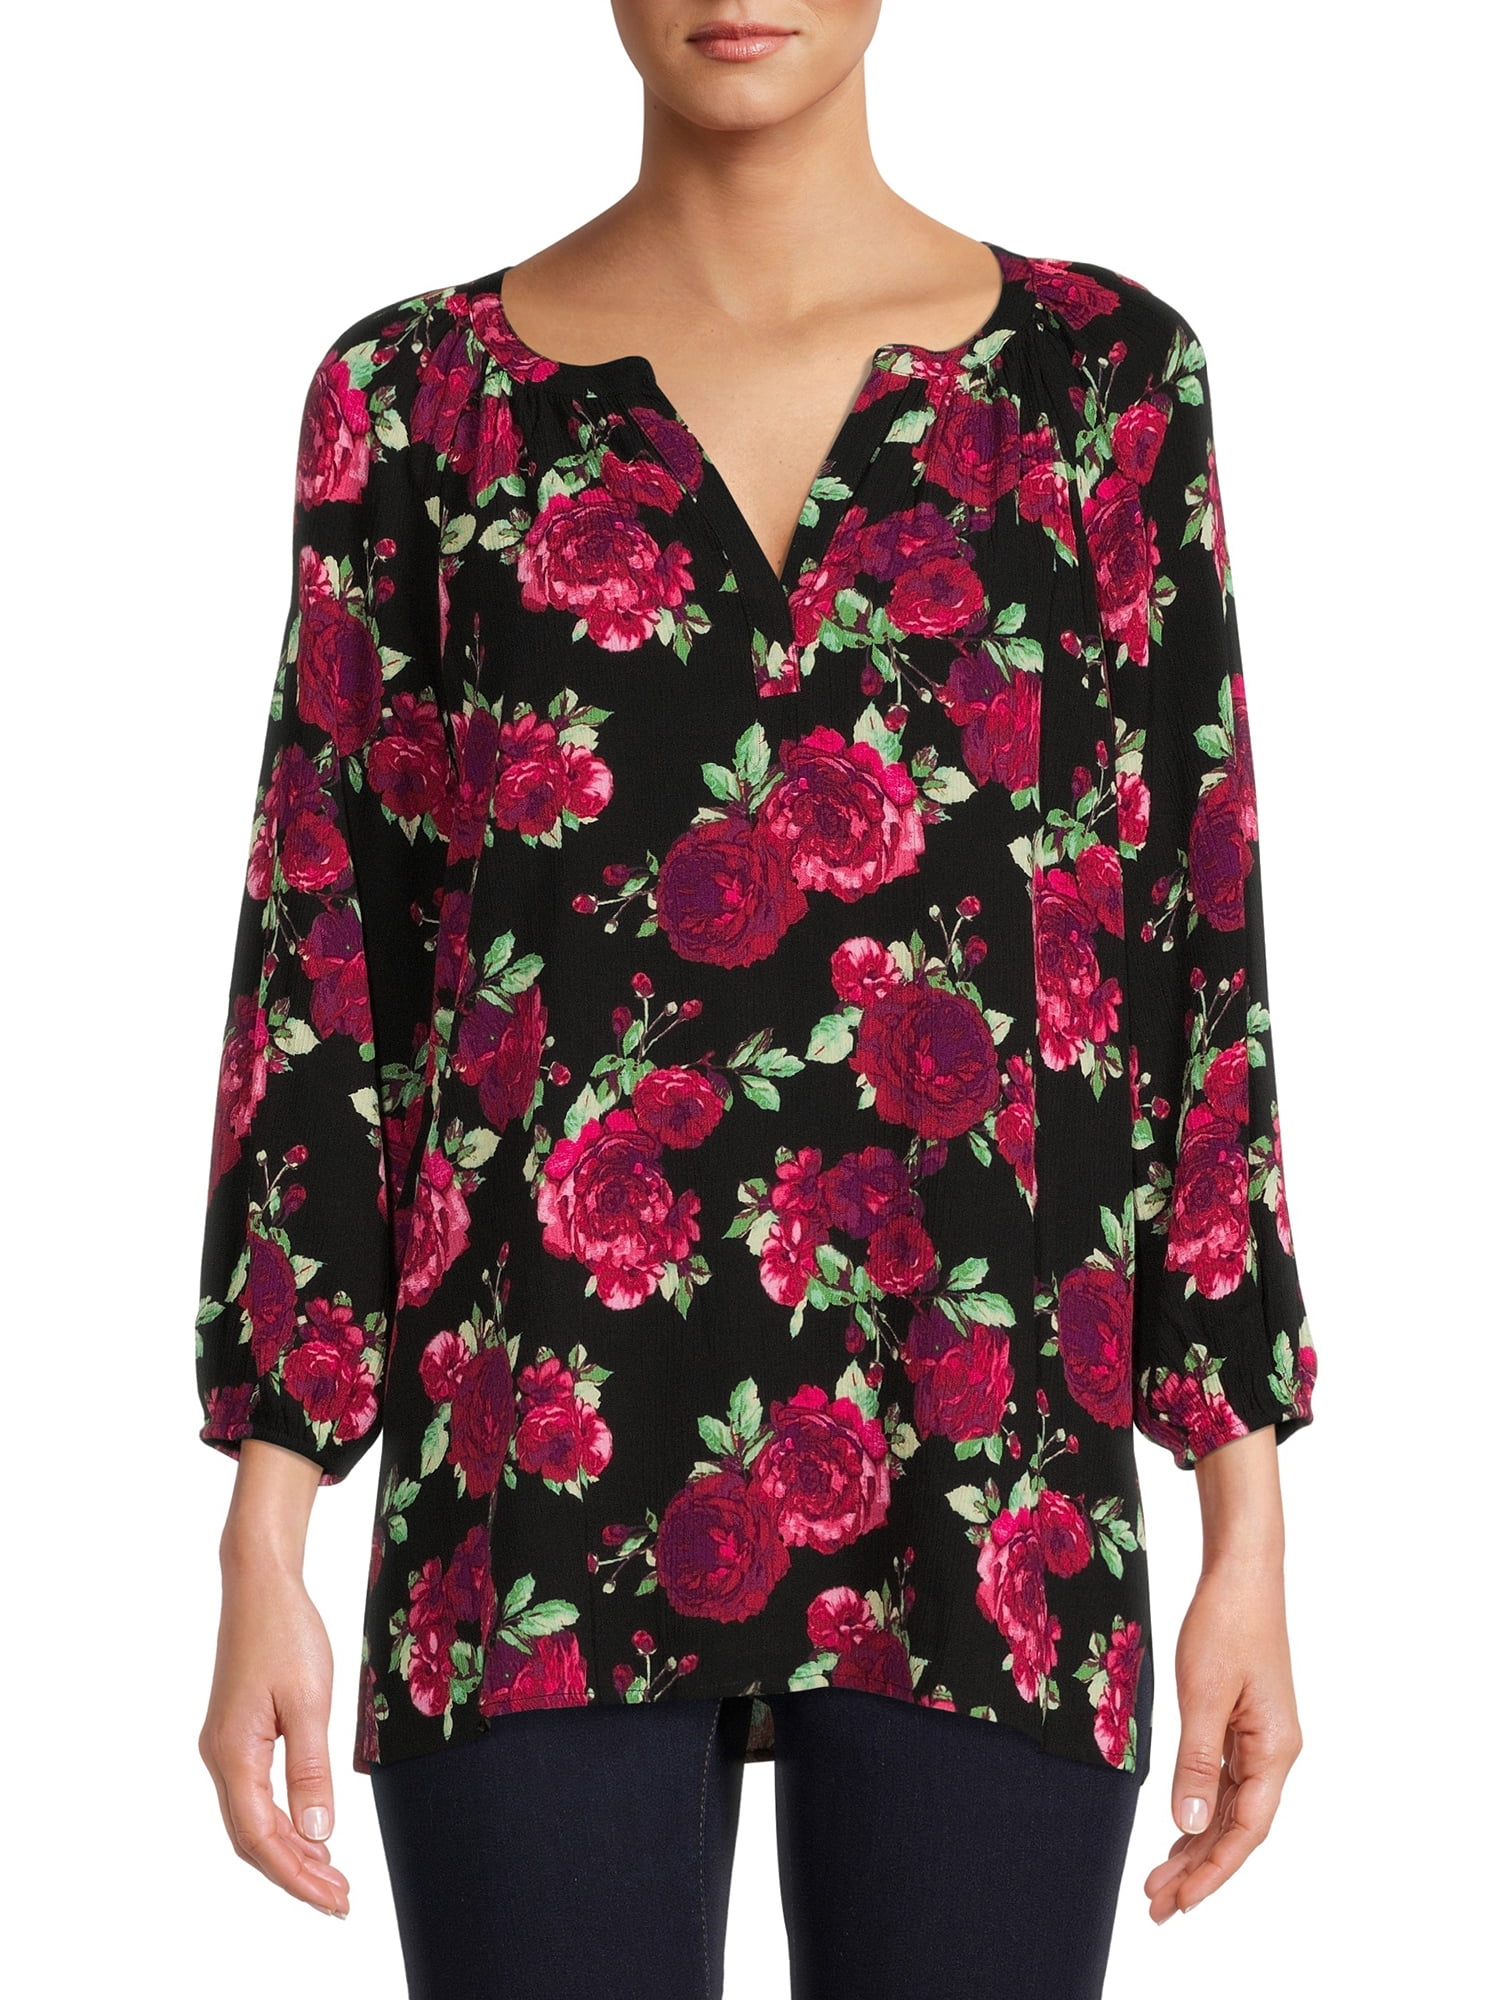 The Pioneer Woman Floral Peasant Blouse - Walmart.com